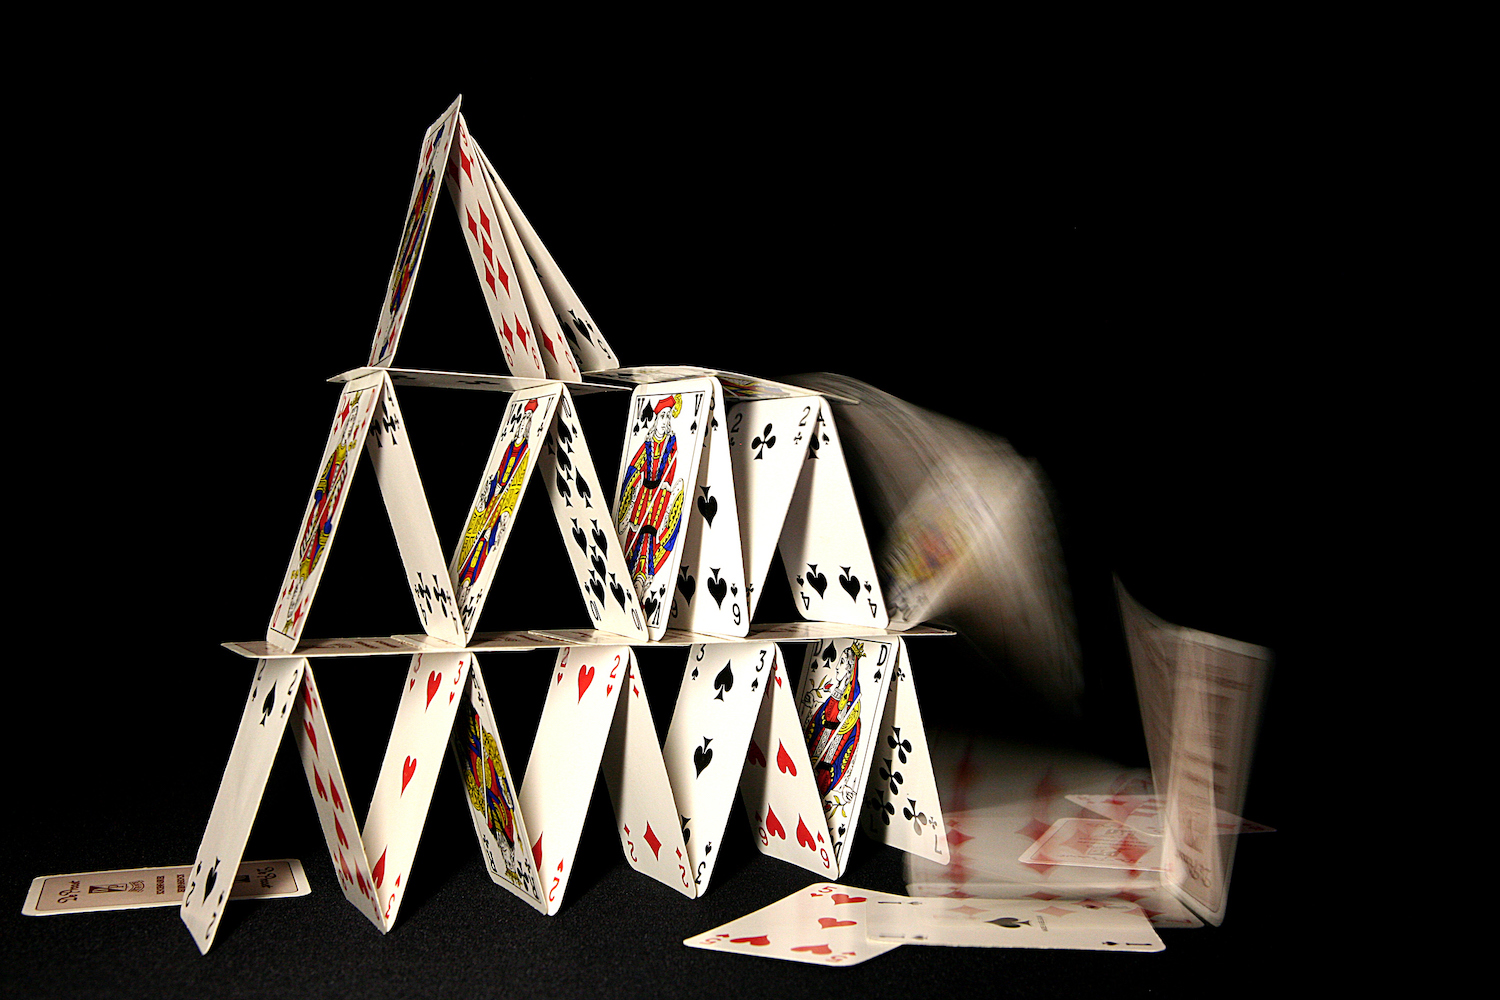 House of cards collapsing on dark background